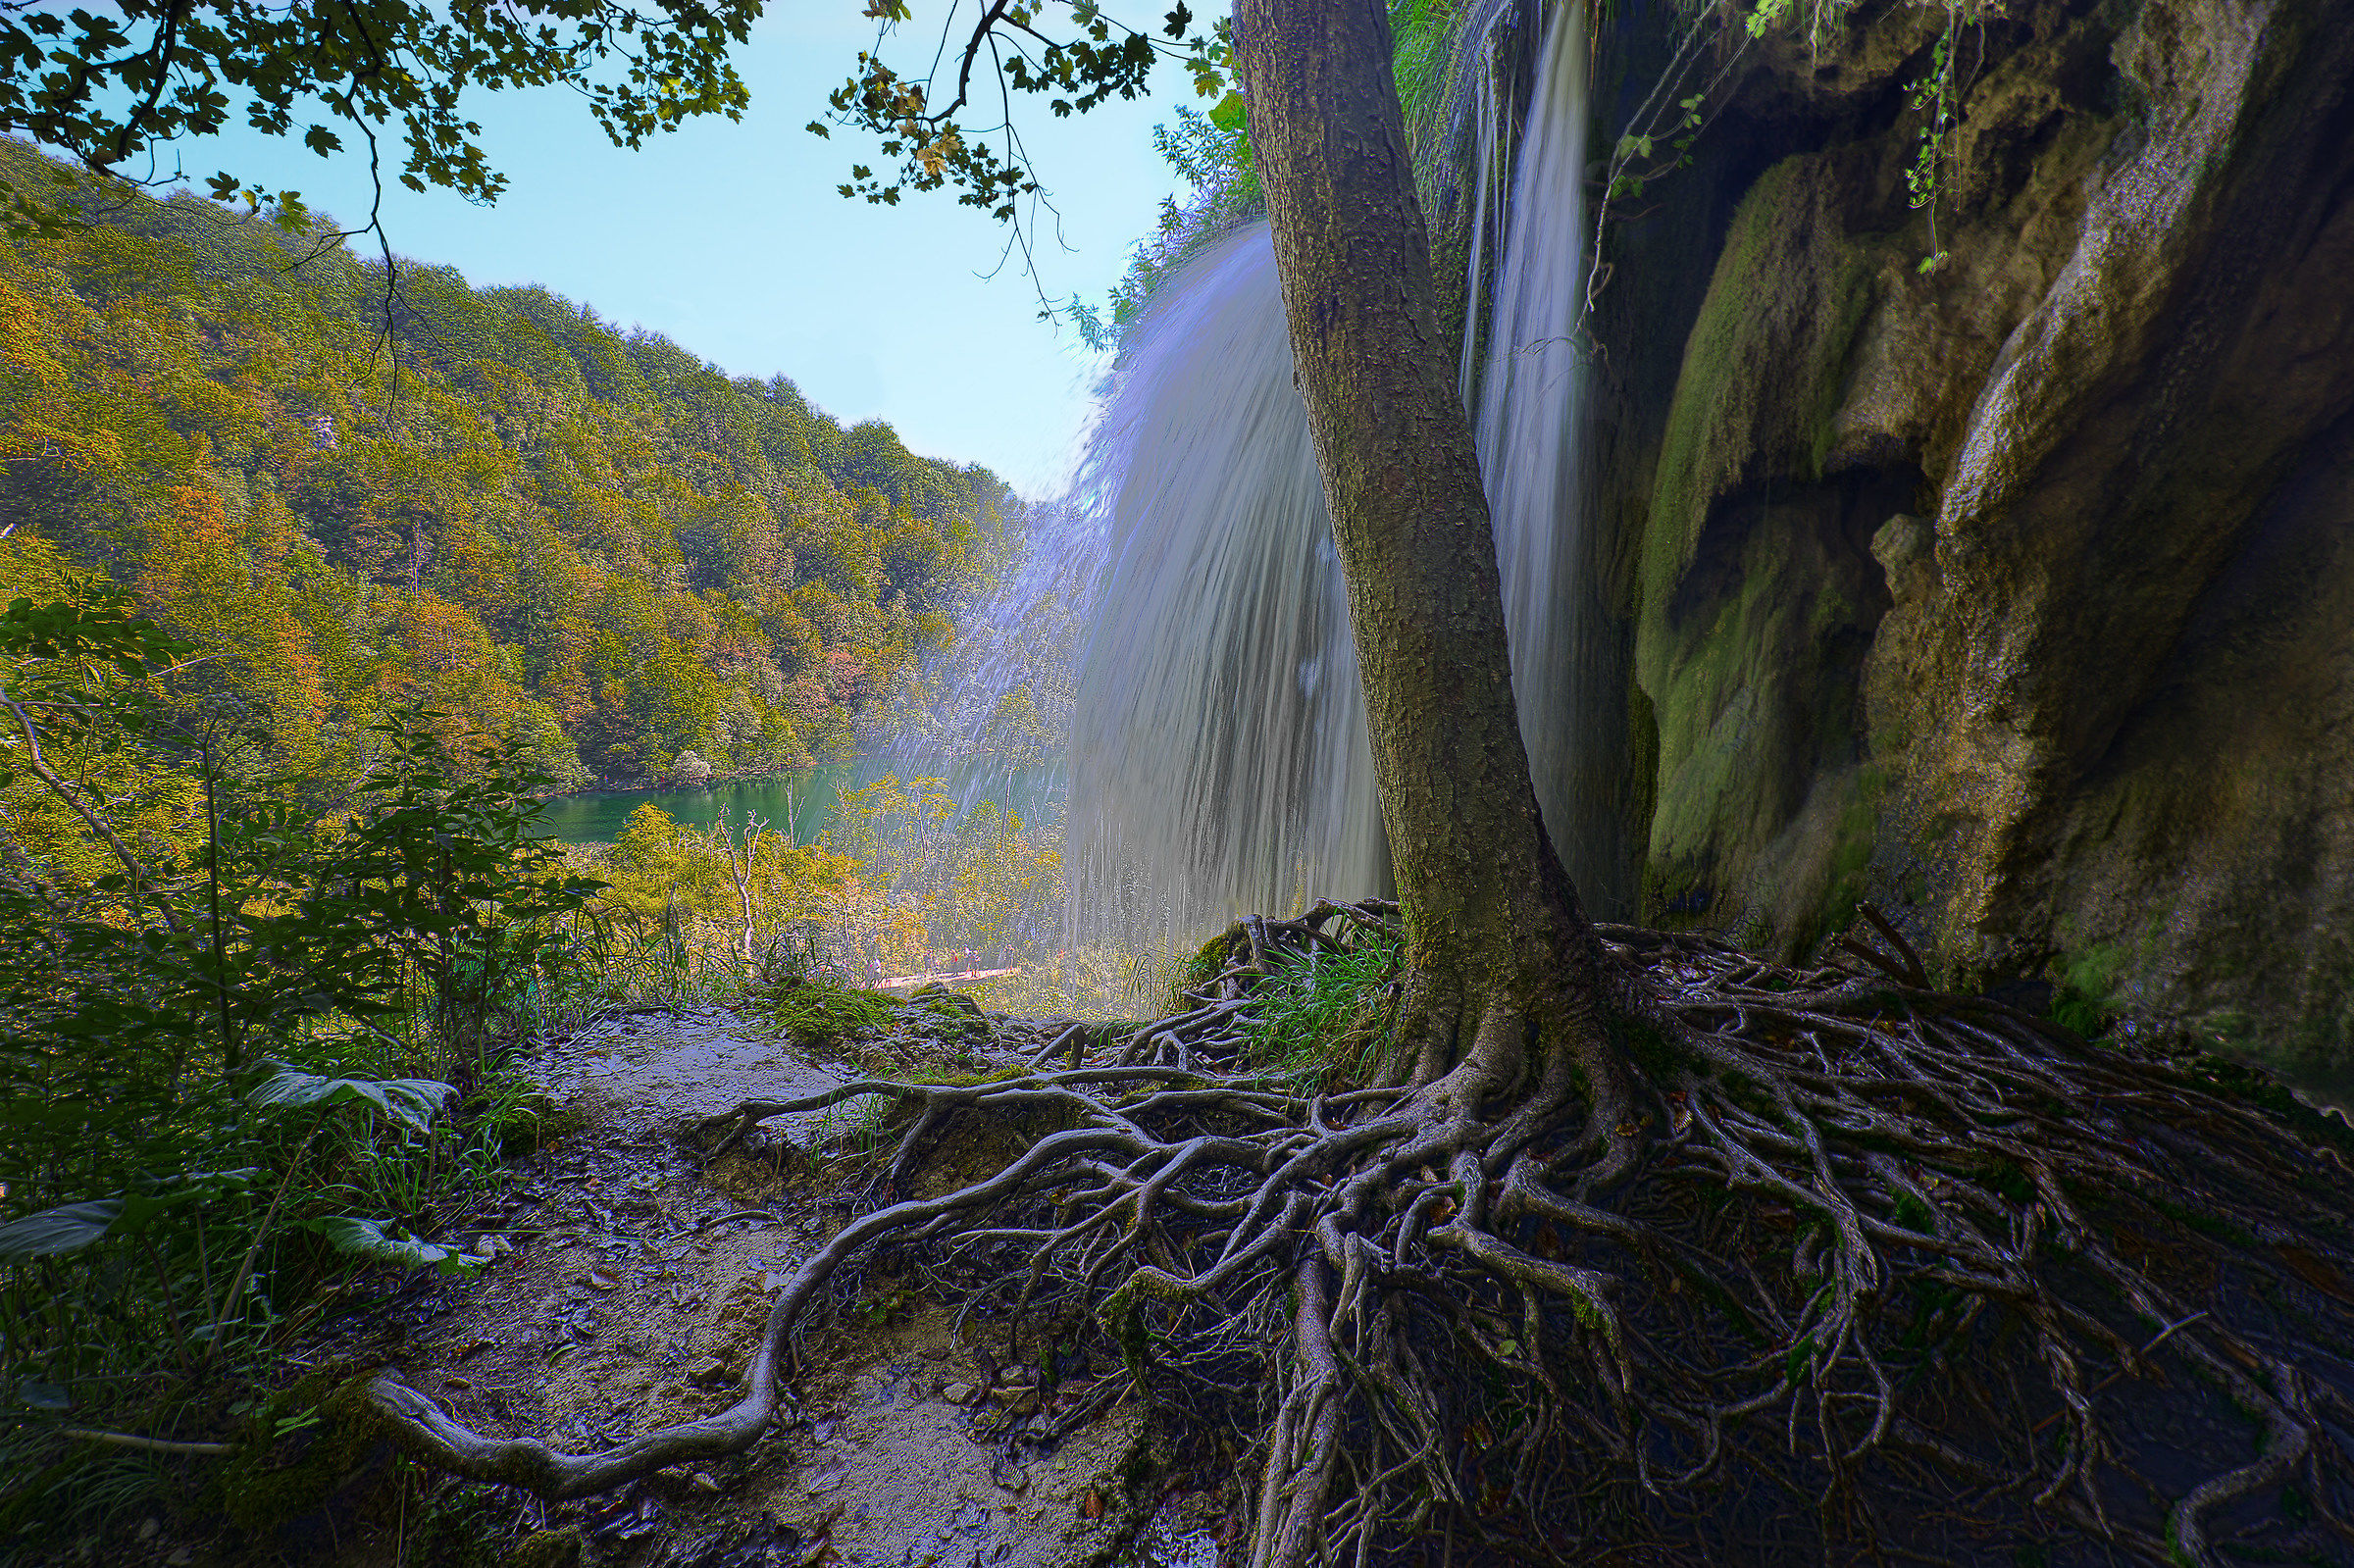 A corner of the Plitvice waterfalls...